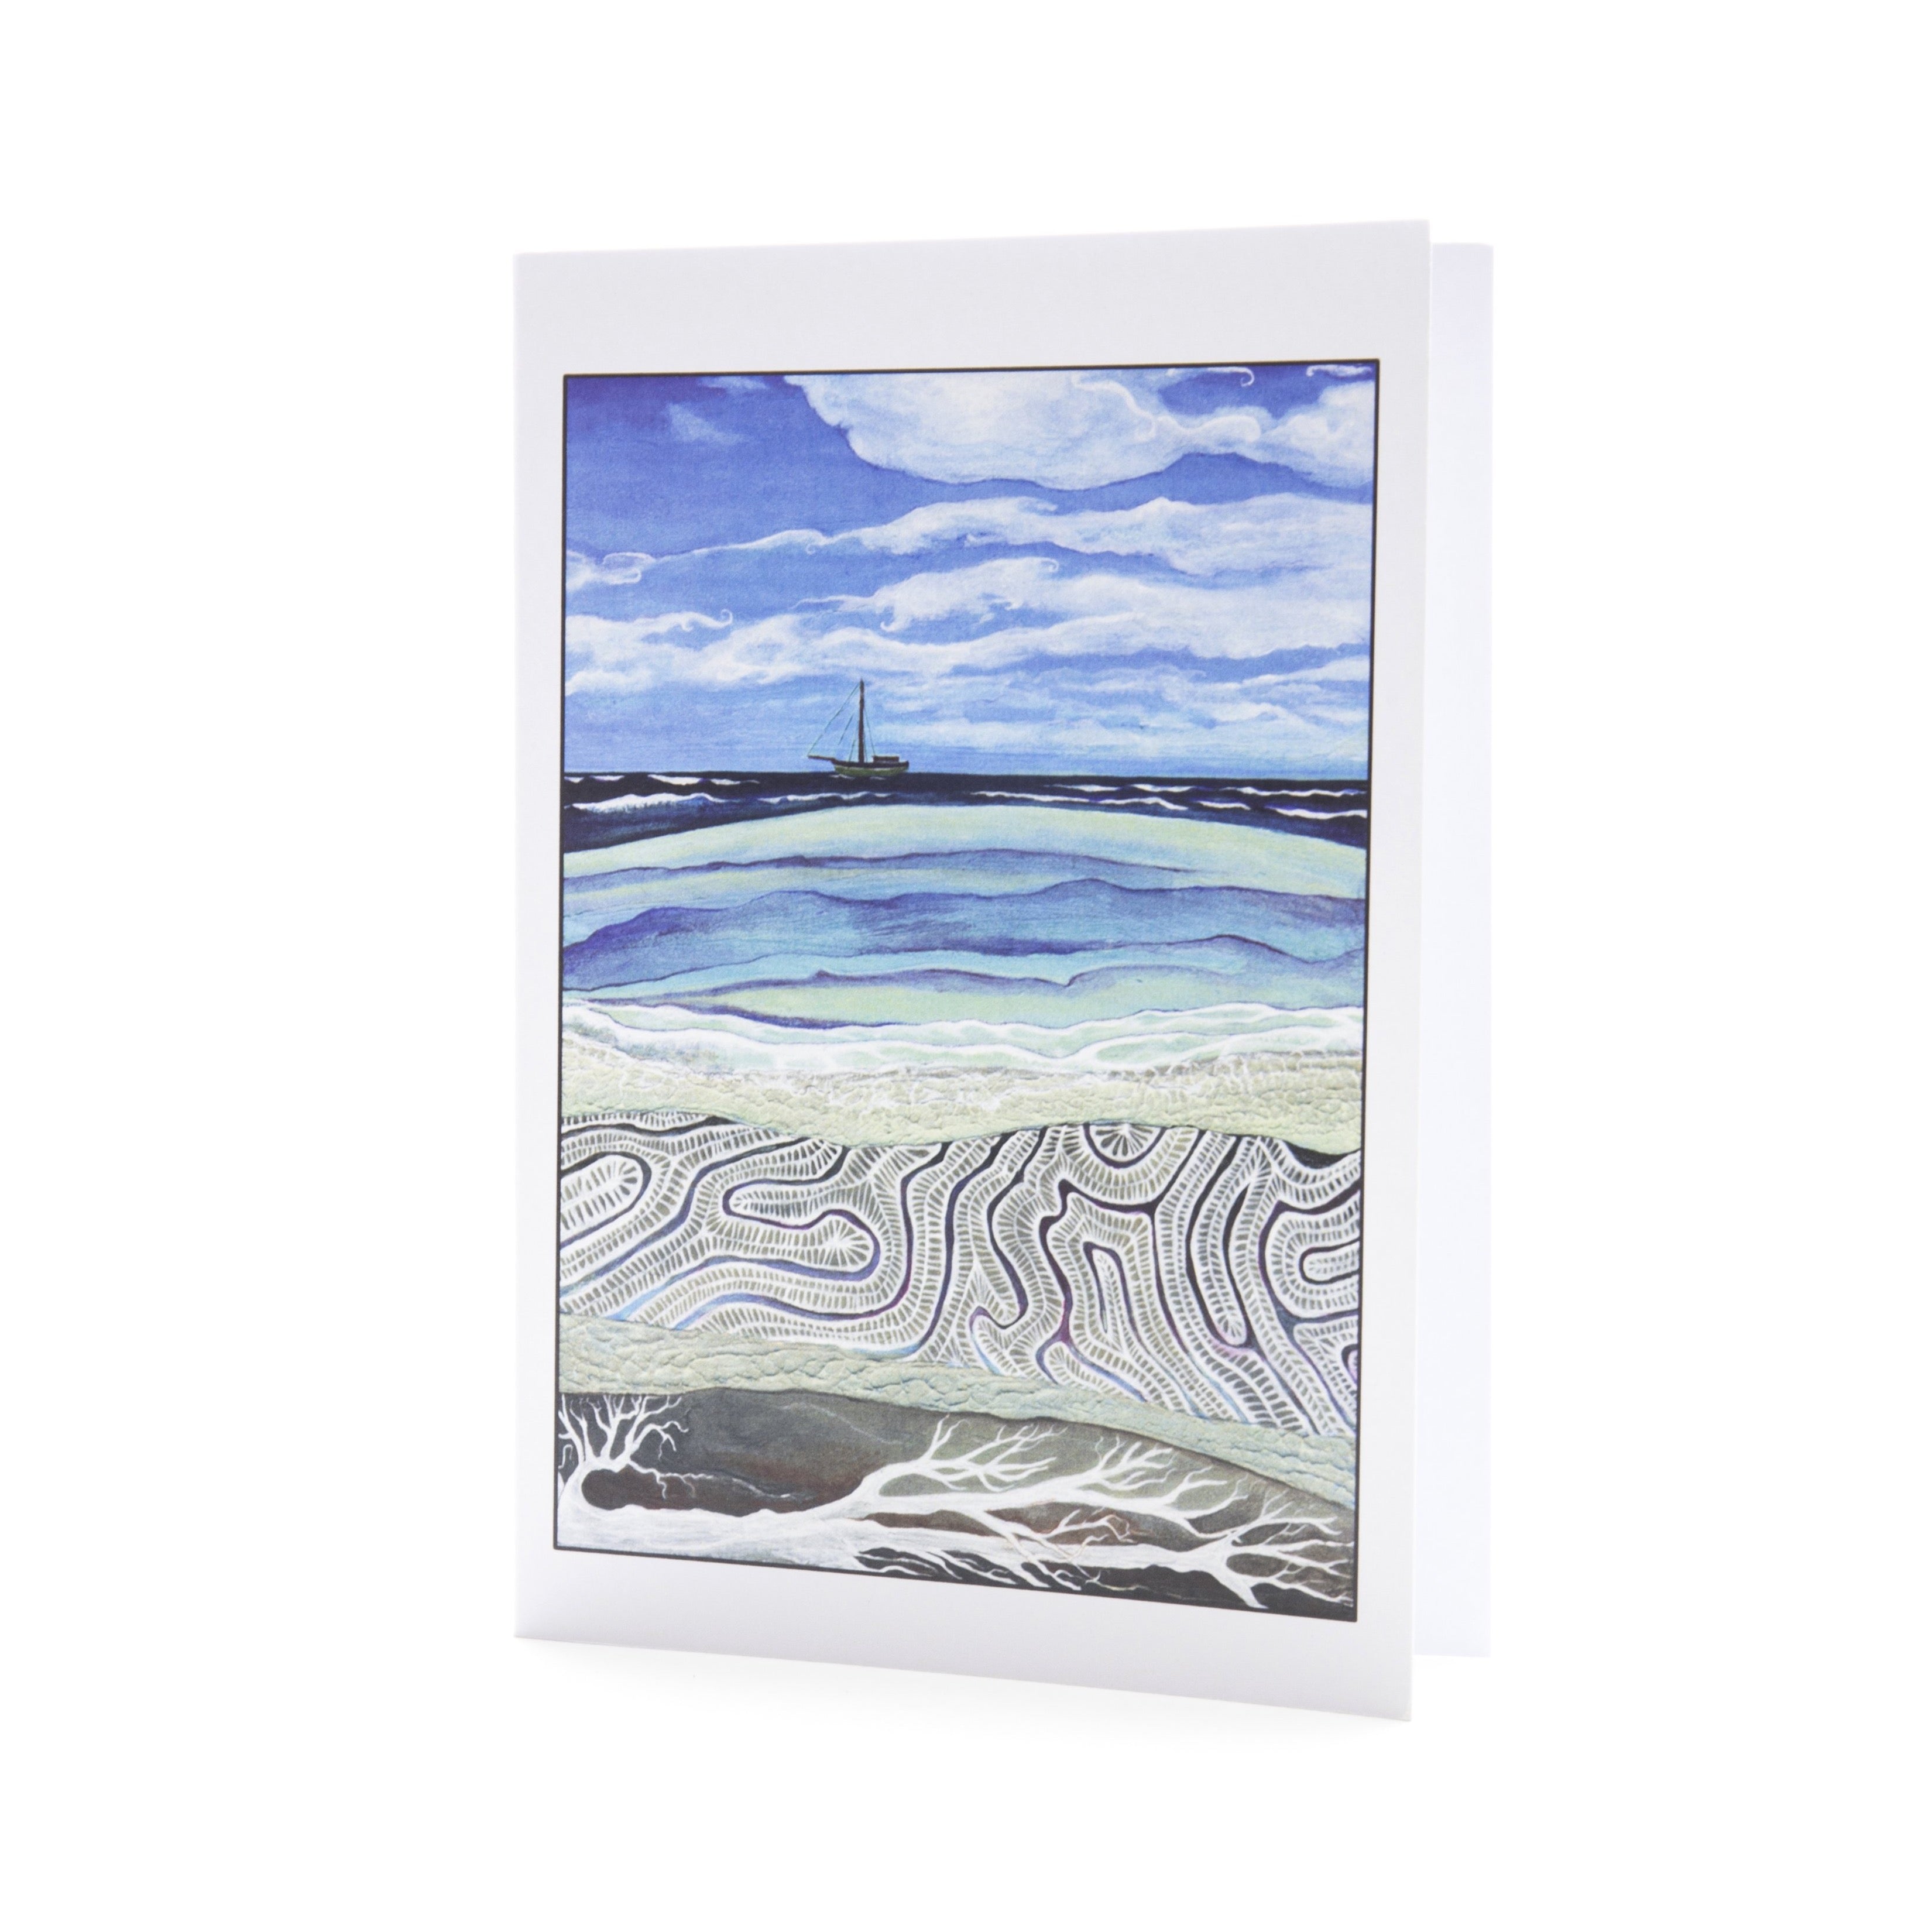 Between The Blue And The Green~ Pacific Island ~ Greeting Card